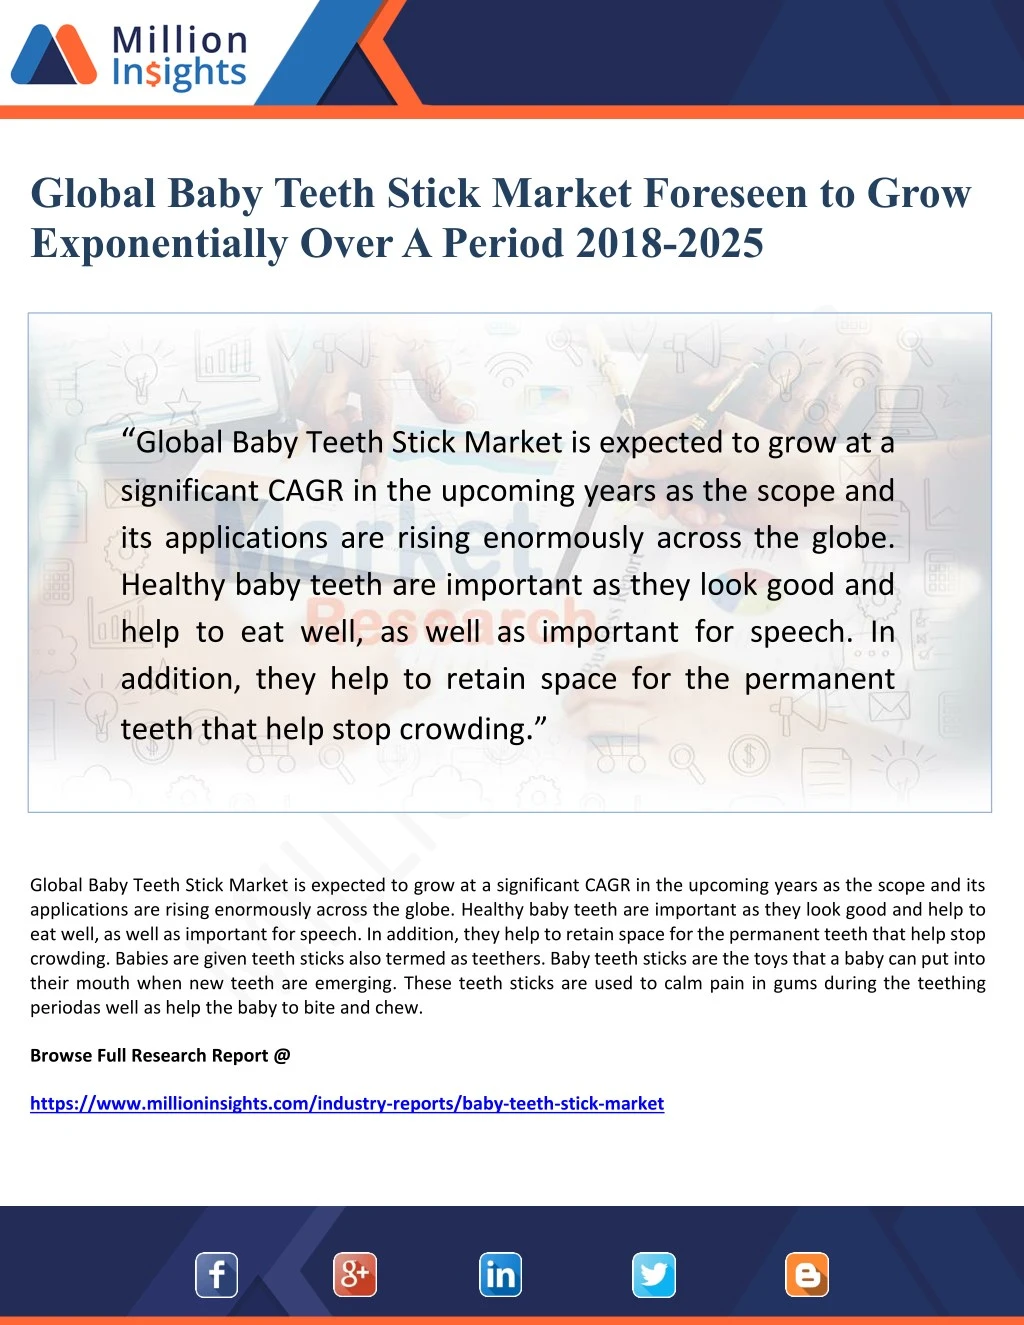 global baby teeth stick market foreseen to grow